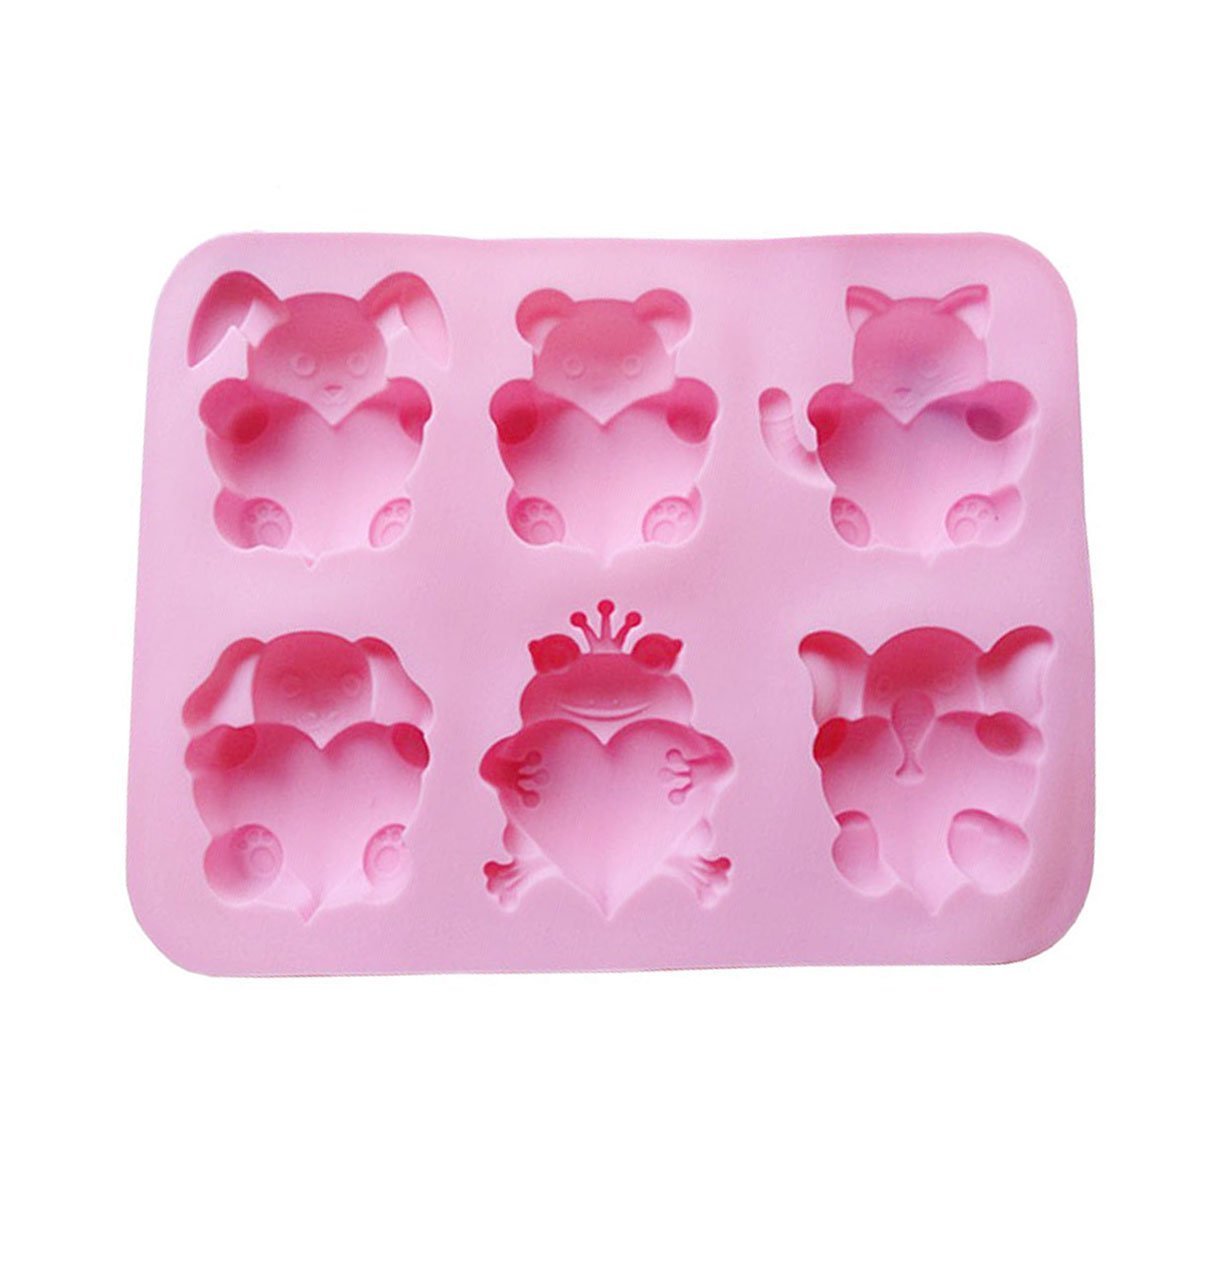 Cherion 6 Cavities Different Cute Animal-shaped Love Silicone Cake Baking Mold Handmade Soap Moulds Cake Pan Muffin Cups Biscuit Chocolate Ice Cube Tray DIY Mold, Pink